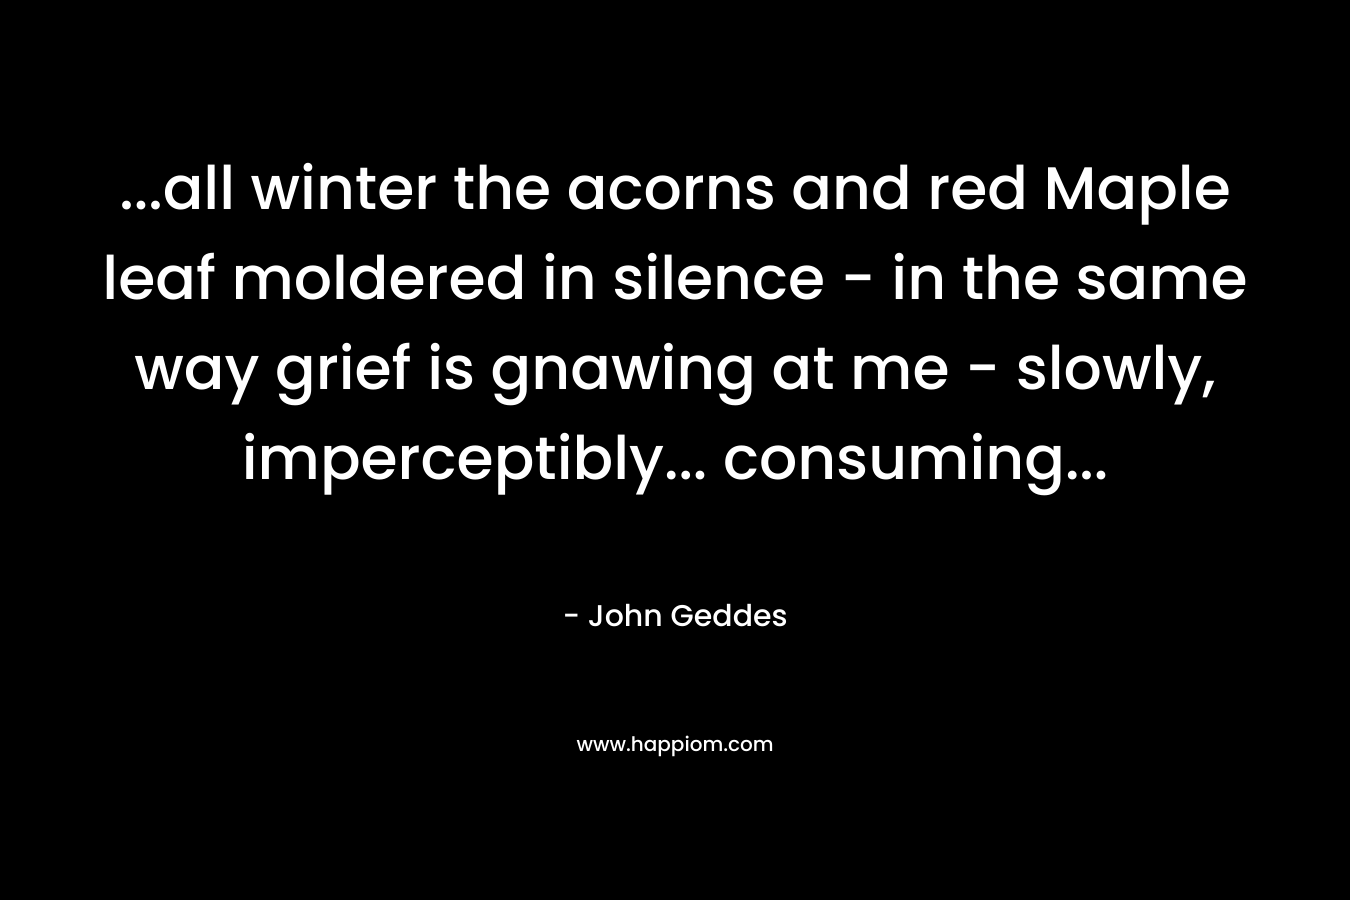 …all winter the acorns and red Maple leaf moldered in silence – in the same way grief is gnawing at me – slowly, imperceptibly… consuming… – John Geddes